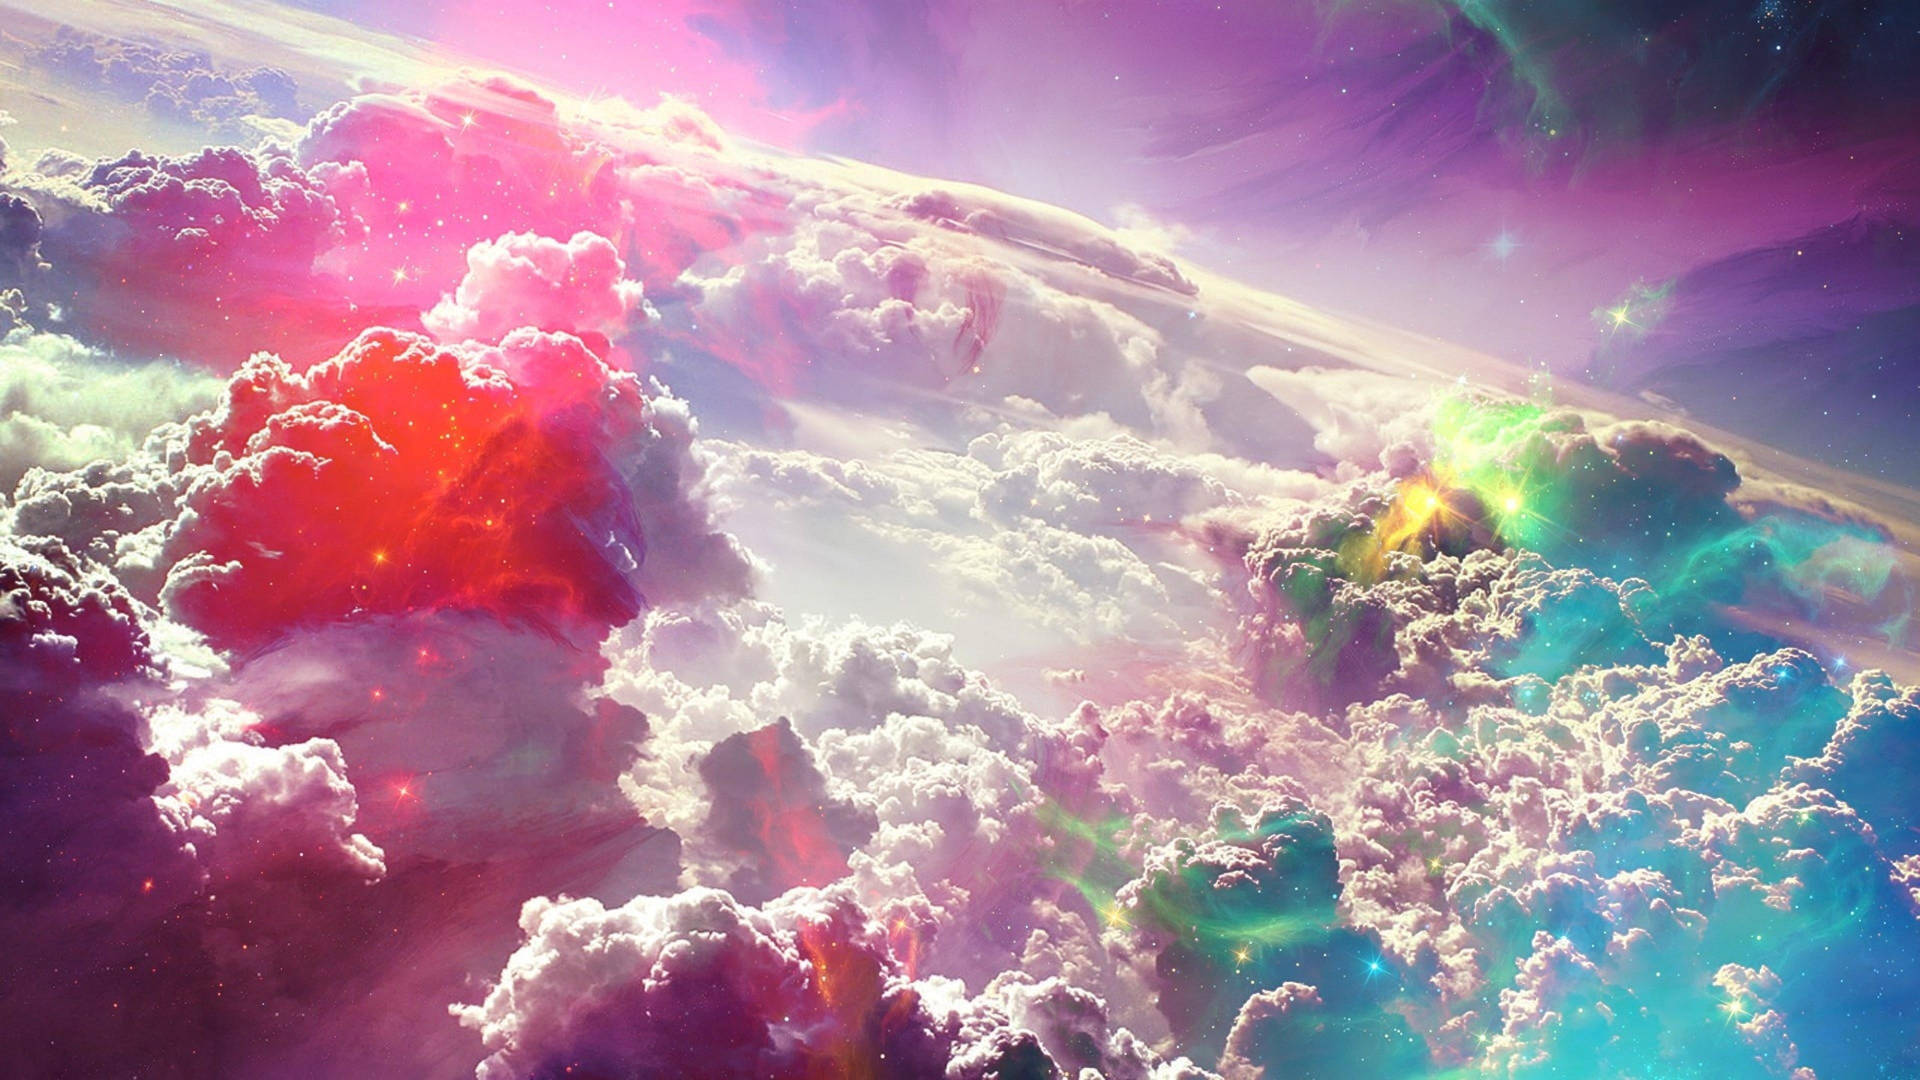 Clouds Floating In Rainbow Galaxy Background